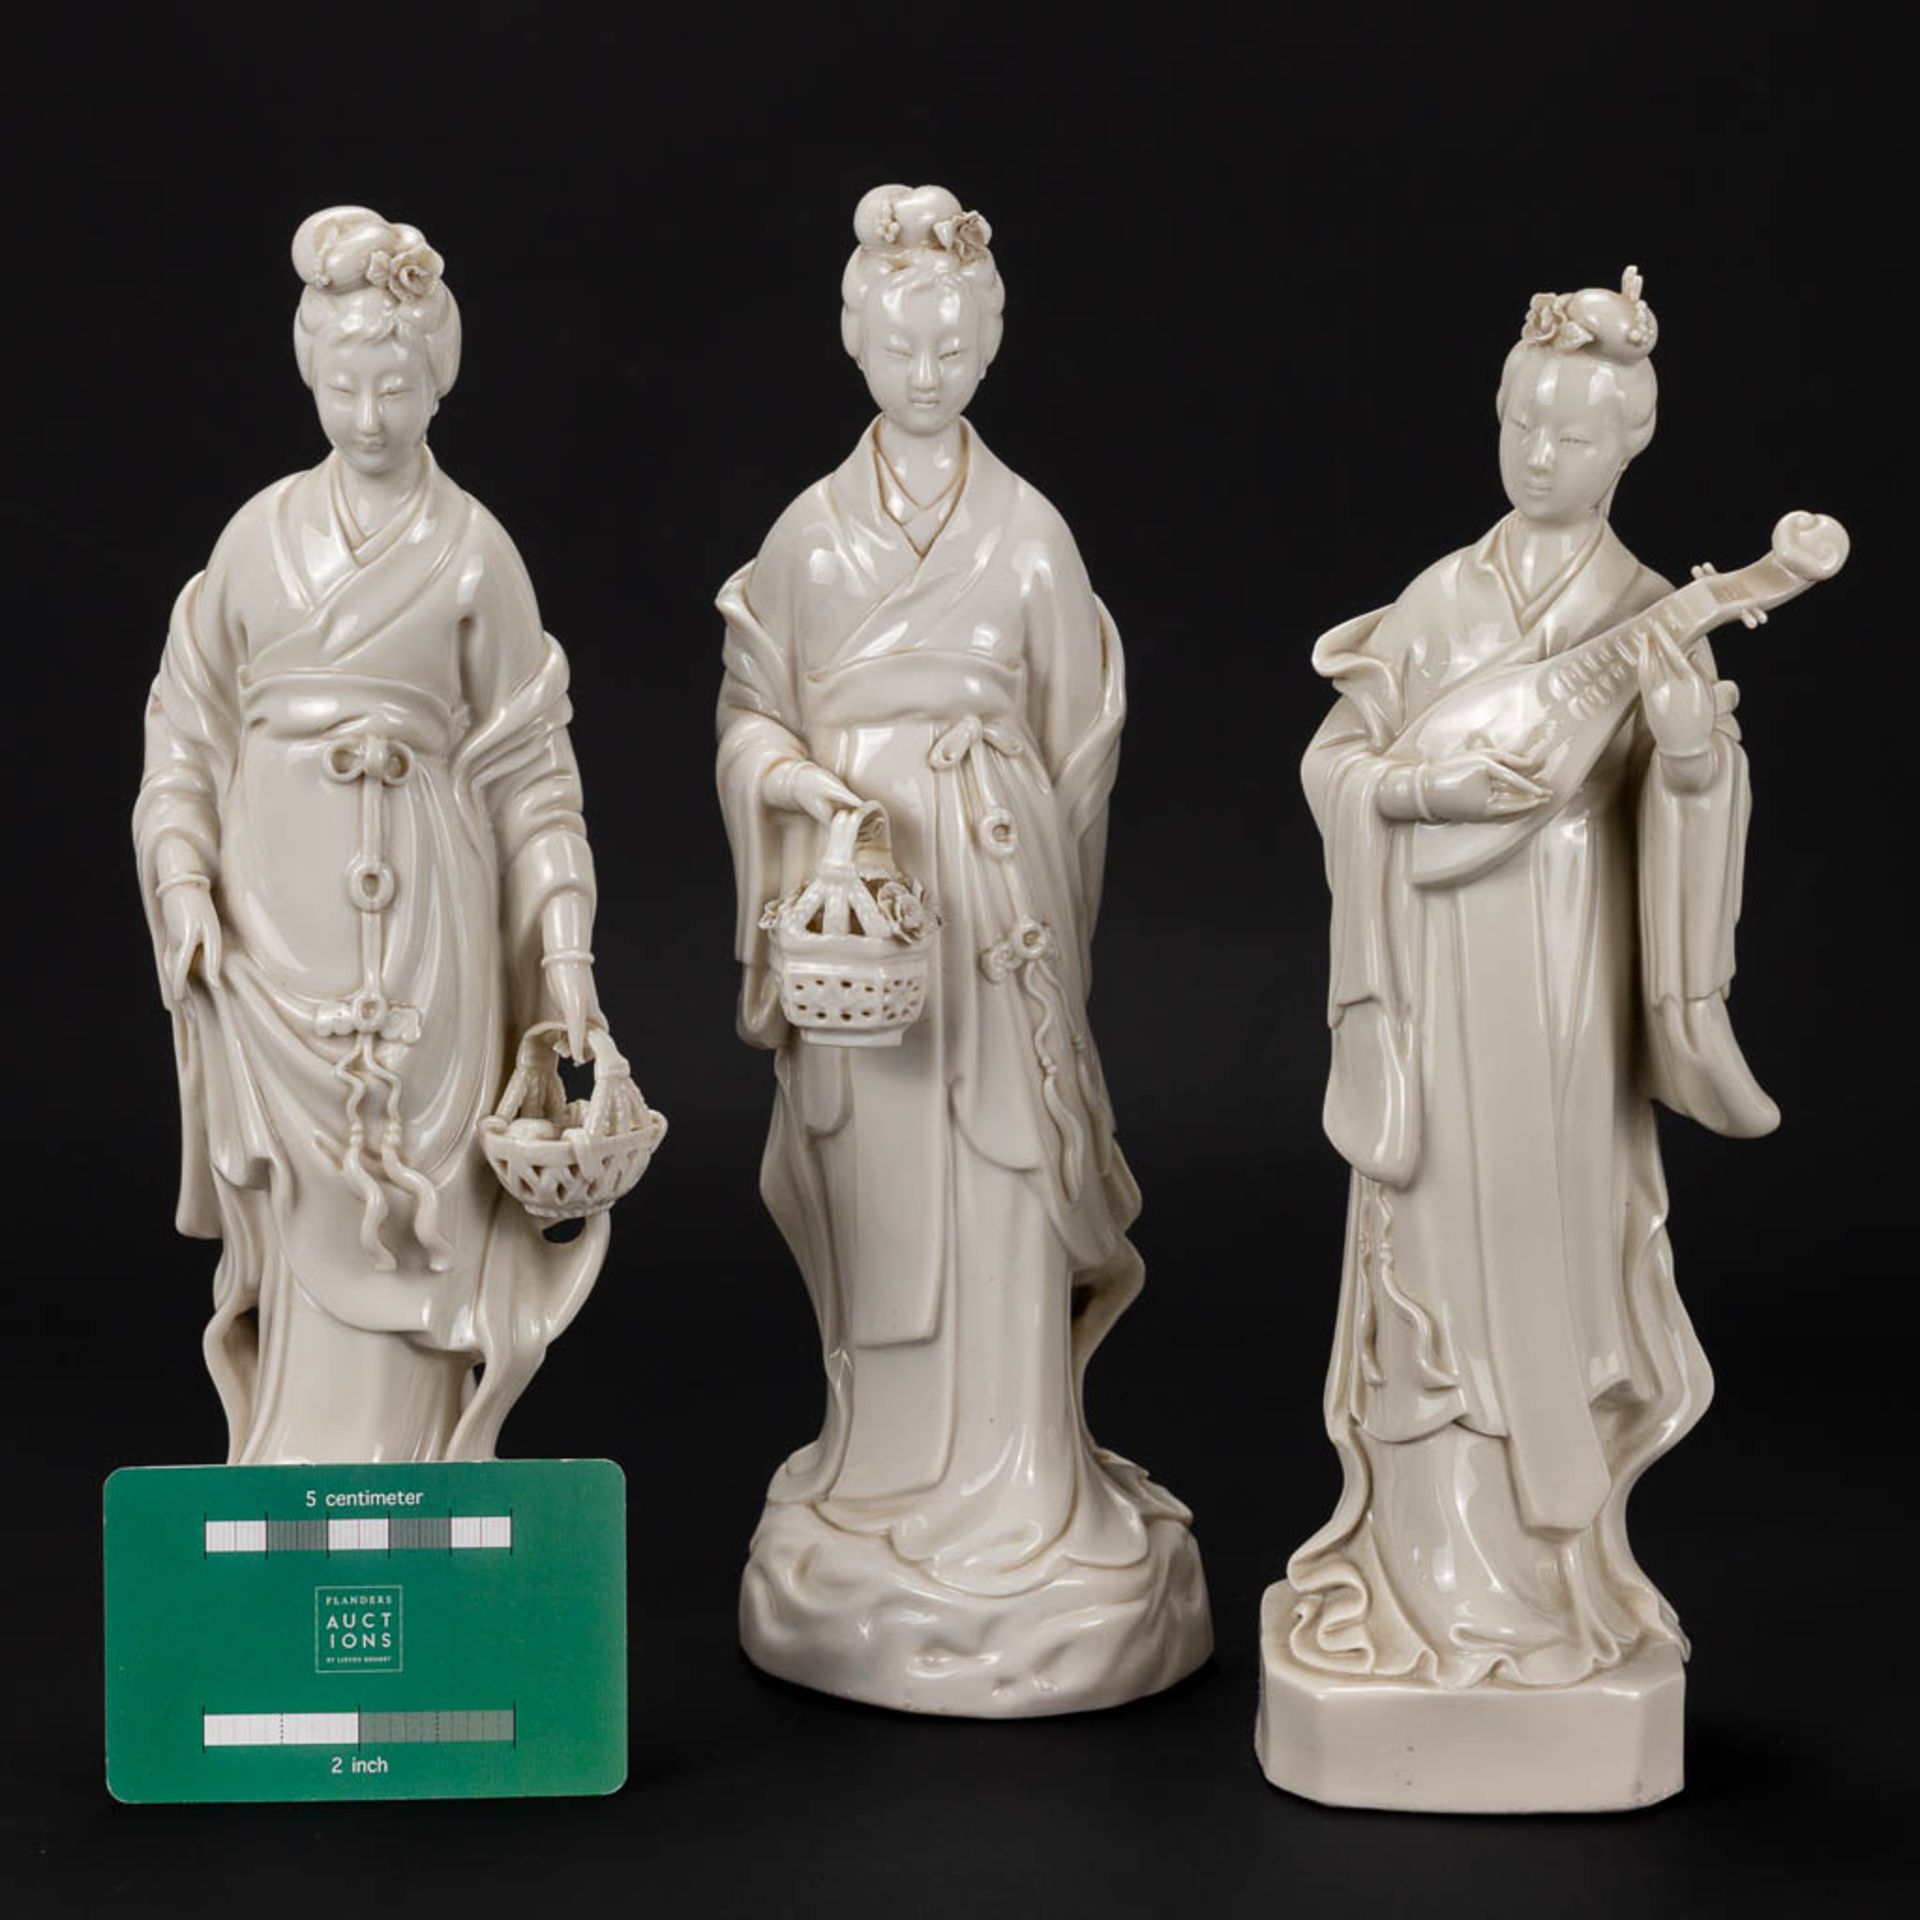 A collection of 3 female figurative statues 'Blanc De Chine' made of Chinese porcelain. - Image 5 of 16